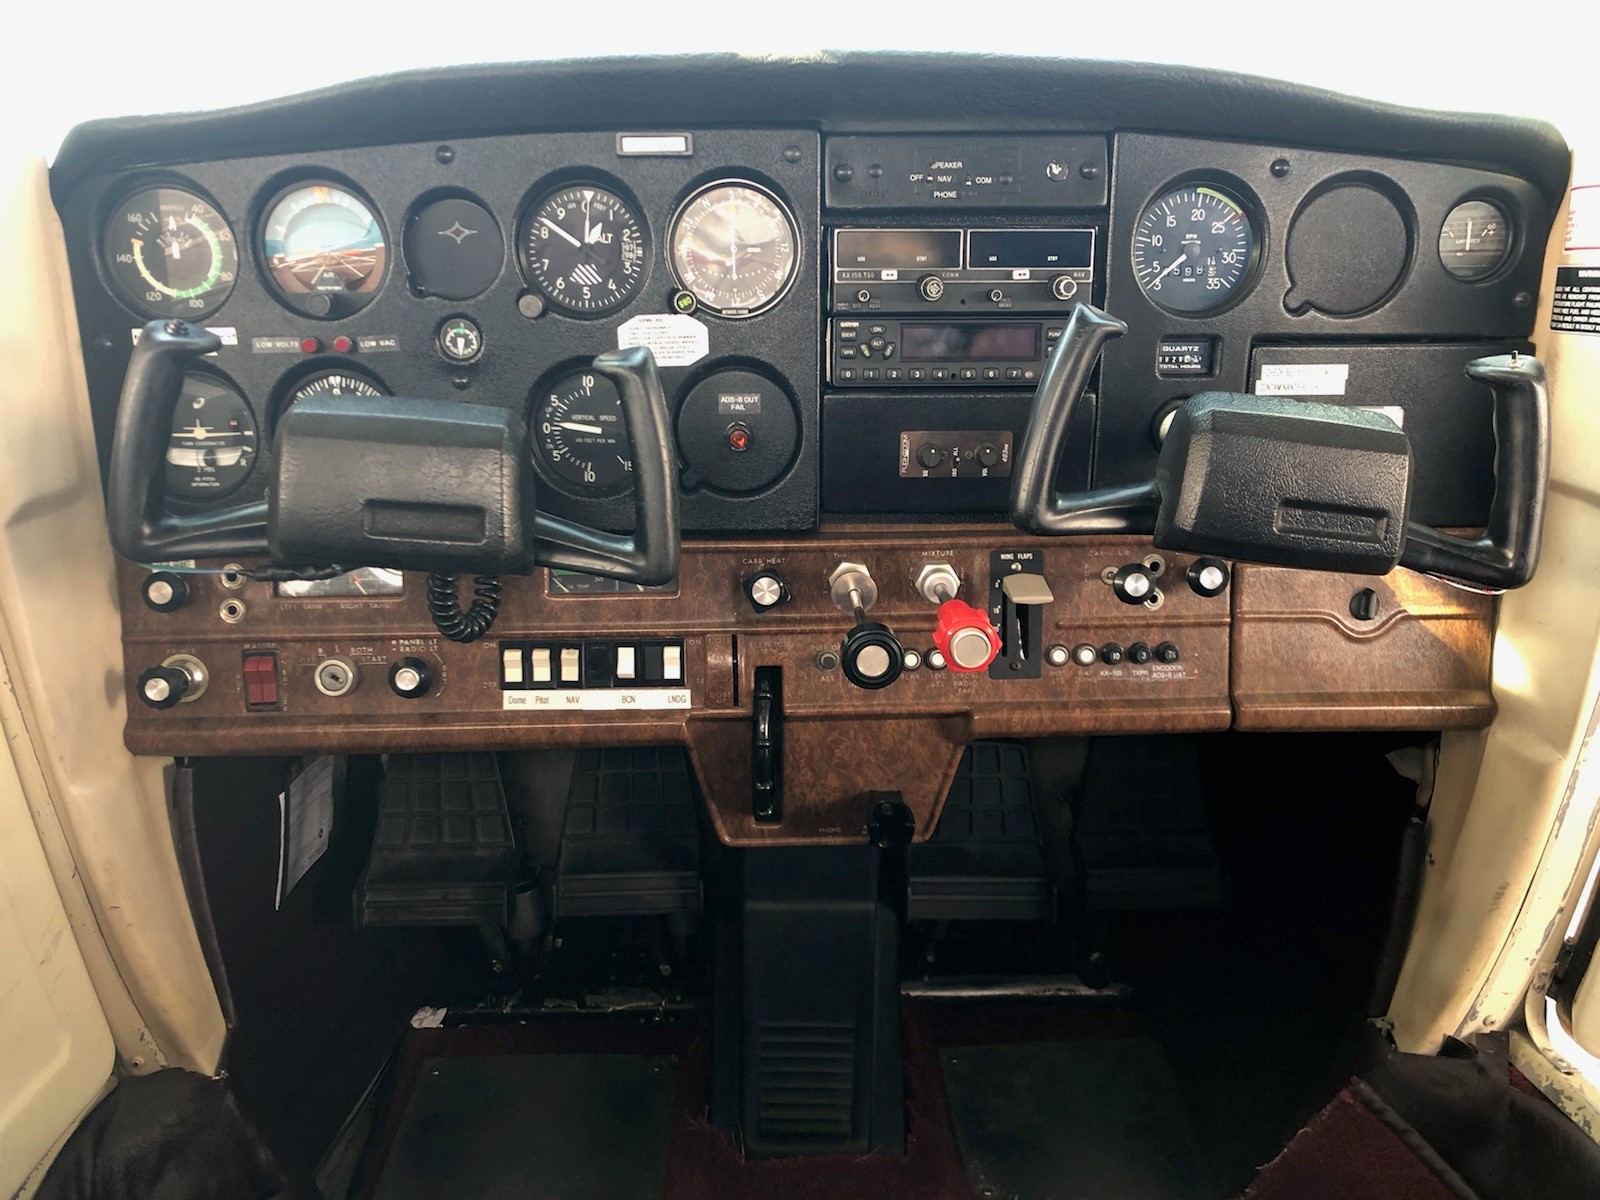 The Controls